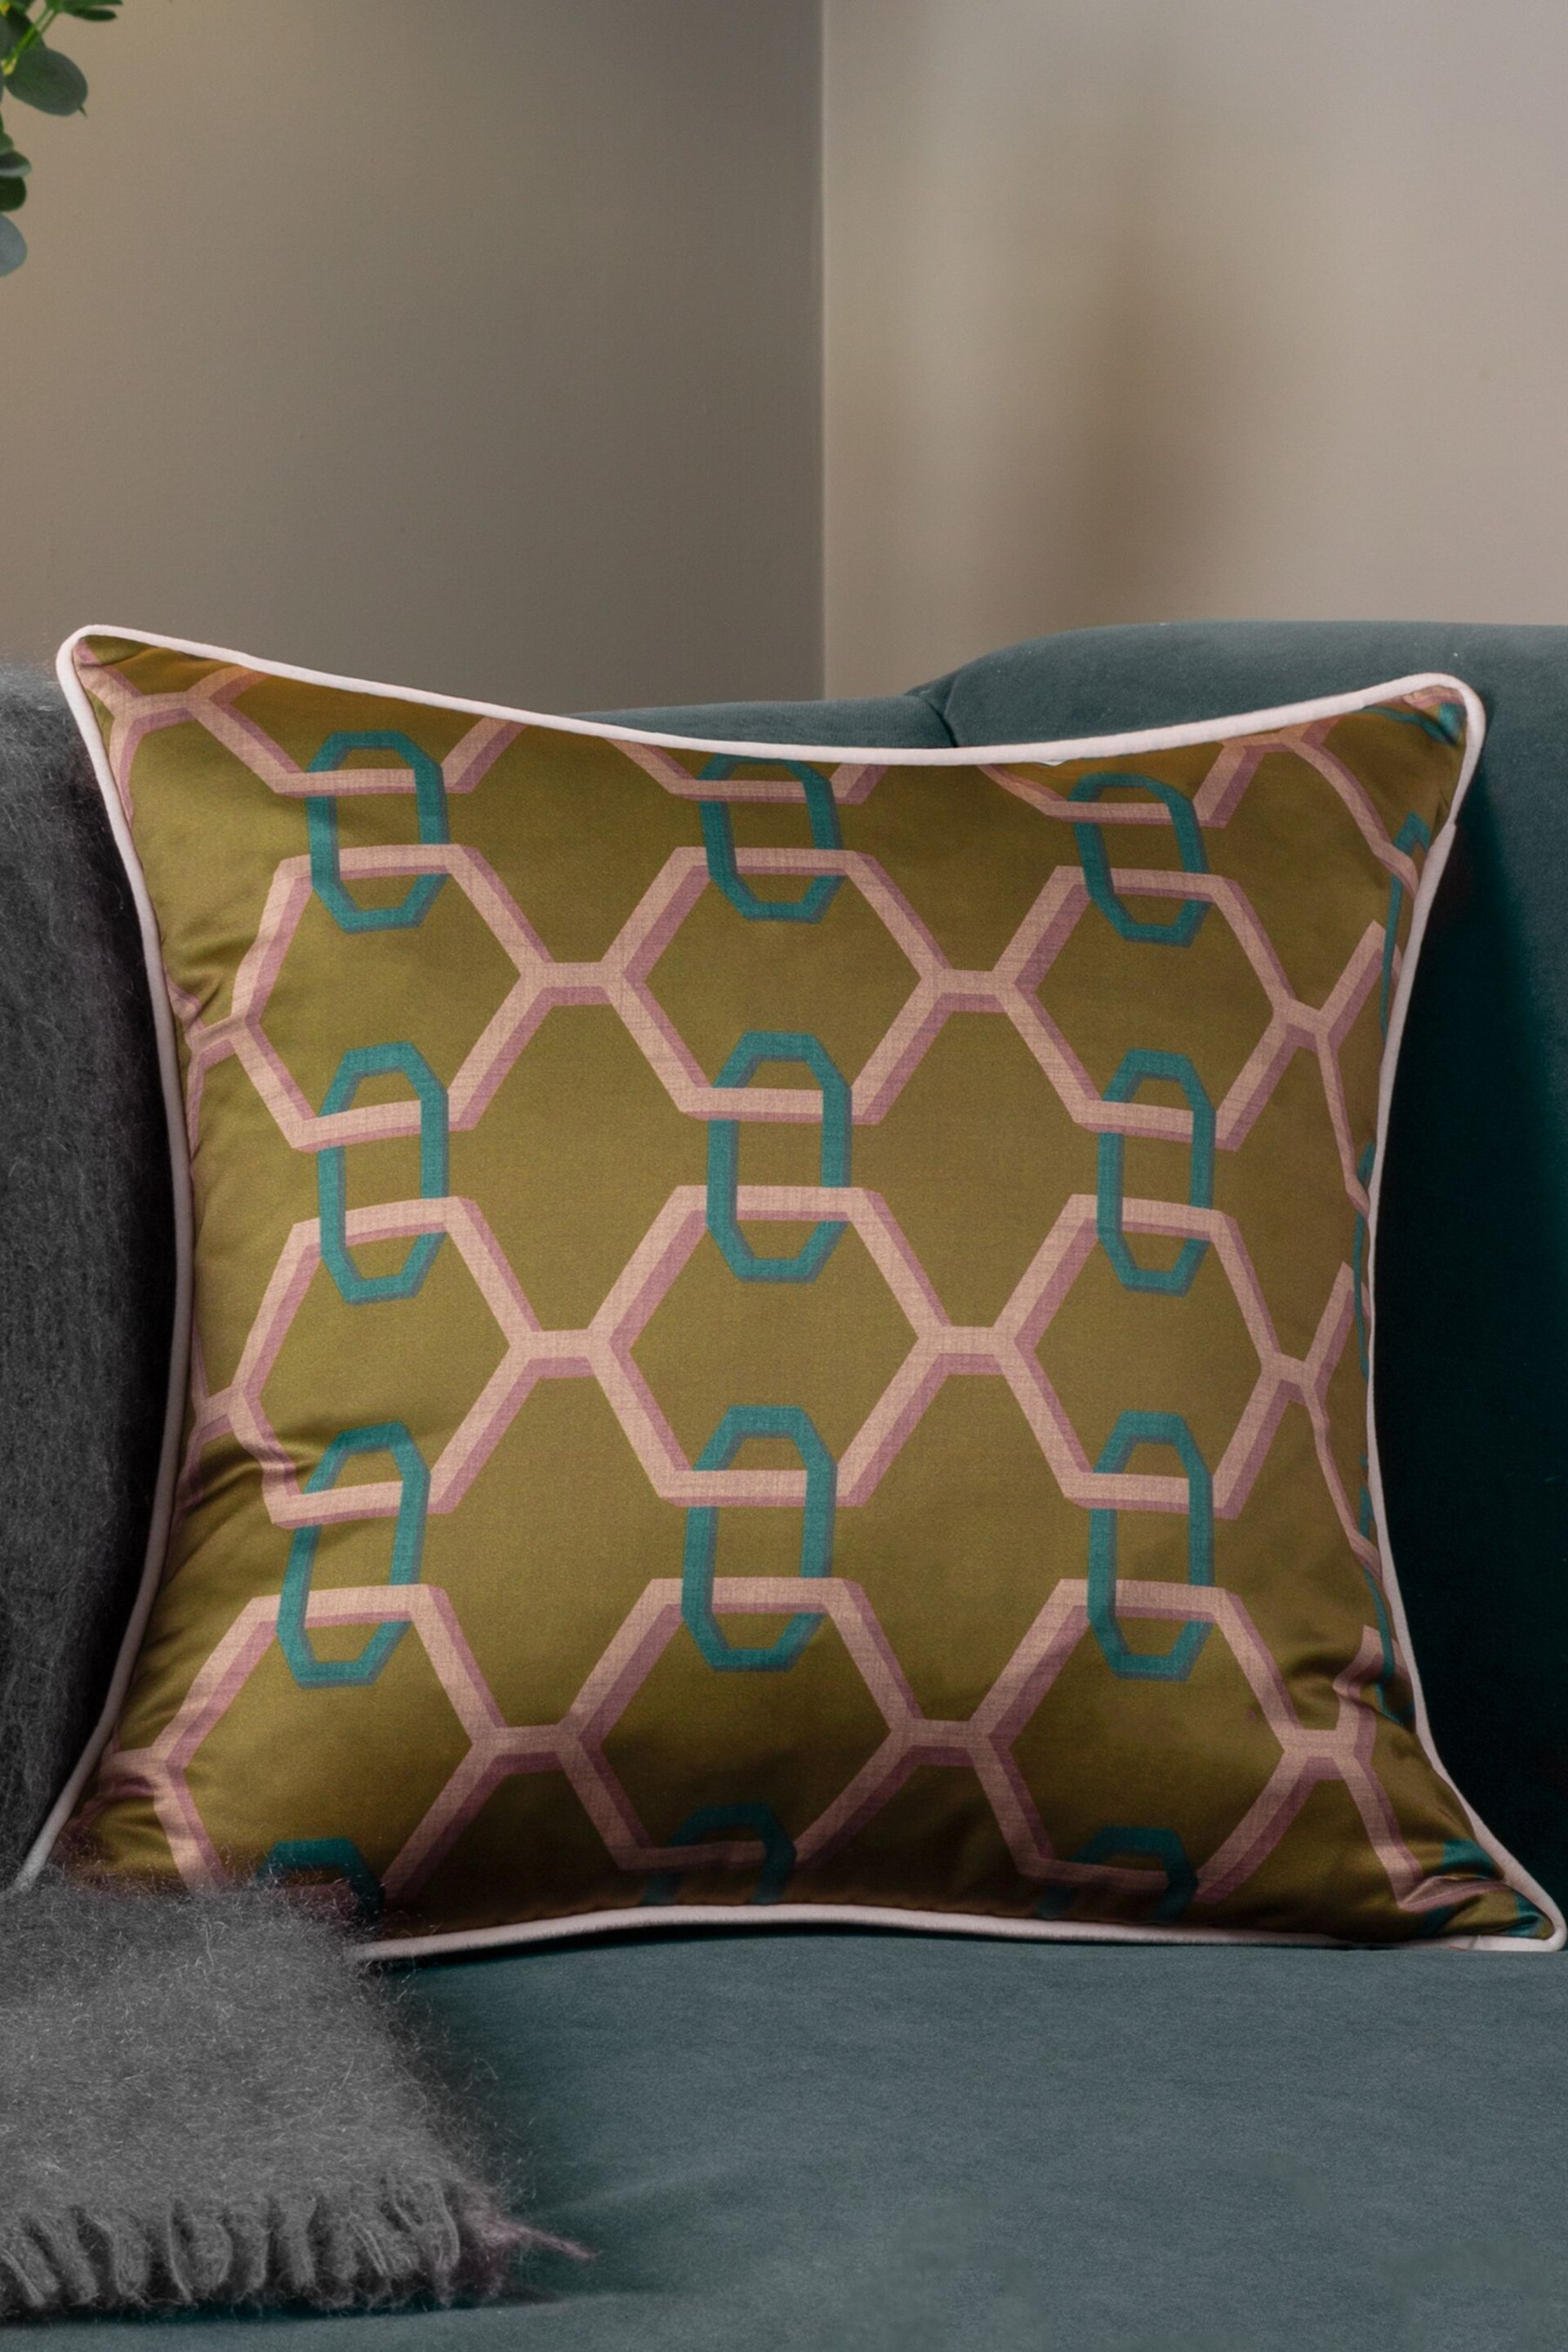 Paoletti Bronze Carnaby Chain Geometric Satin Polyester Filled Cushion - Image 1 of 5